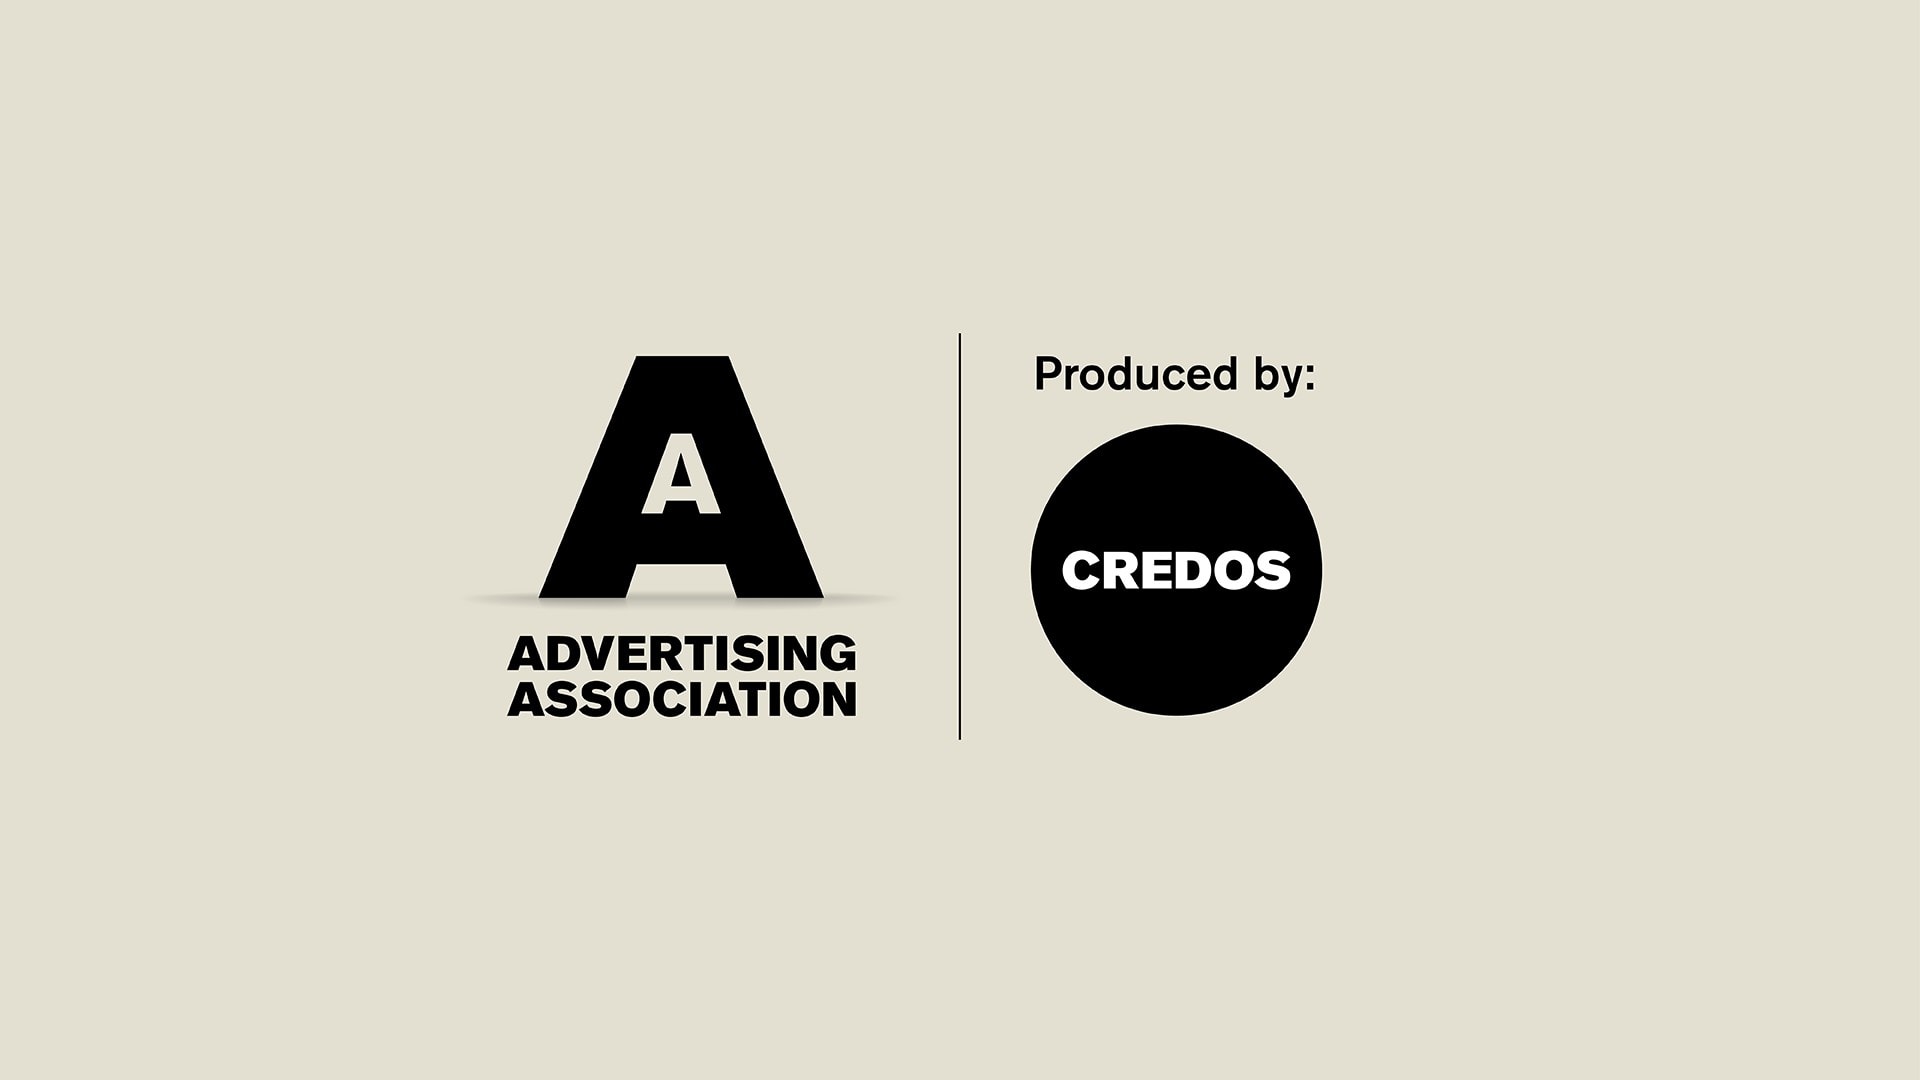 The Advertising Association and Credos Logos in black on a beige background